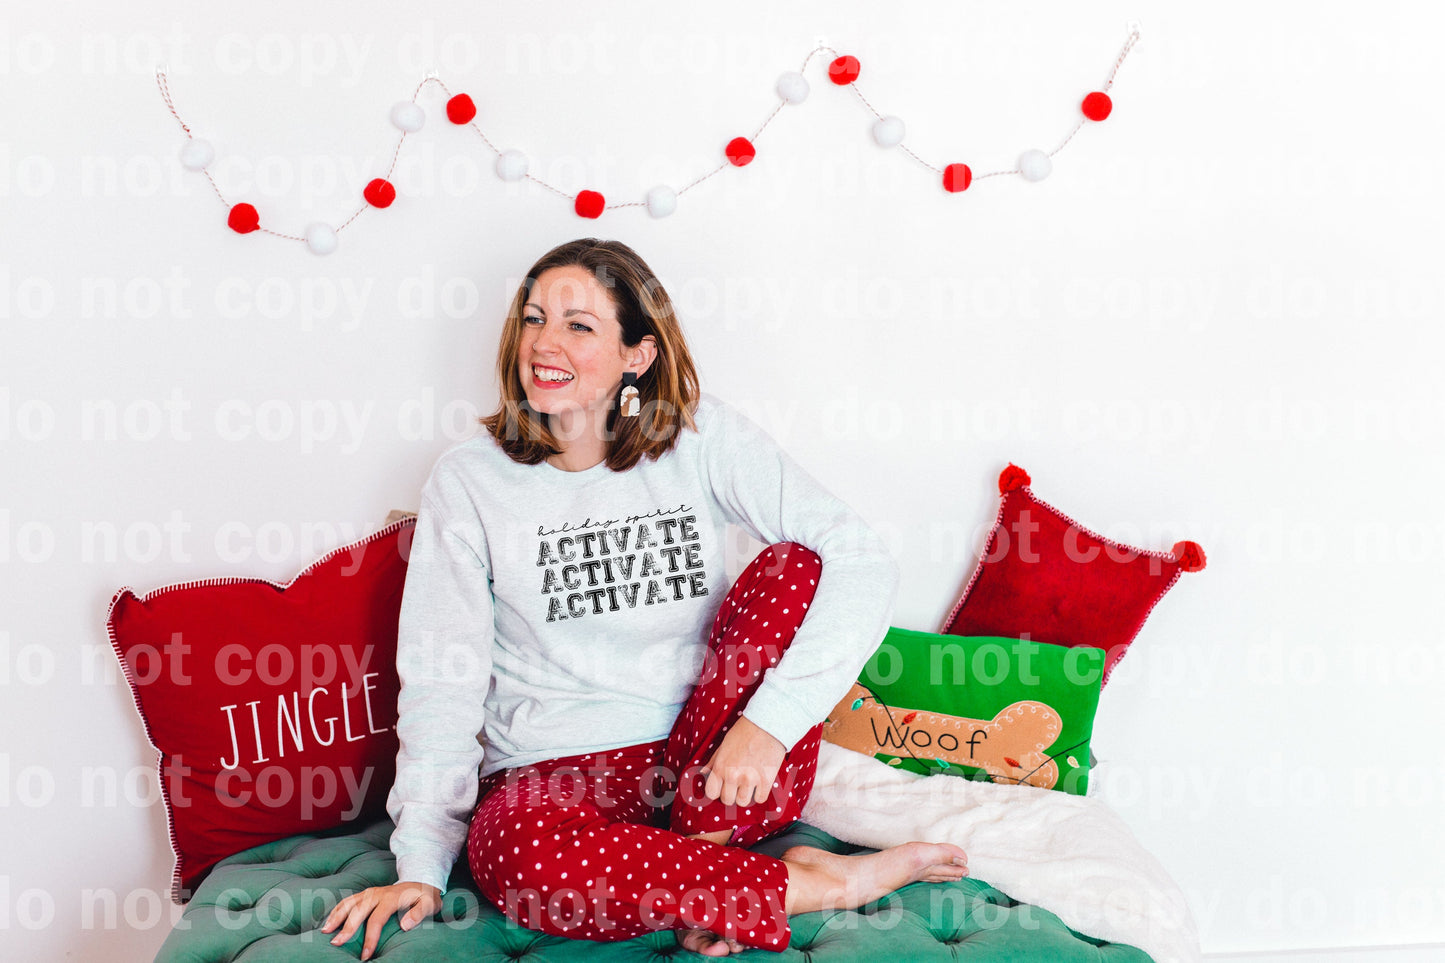 Holiday Spirit Activate Distressed Black/White Dream Print or Sublimation Print